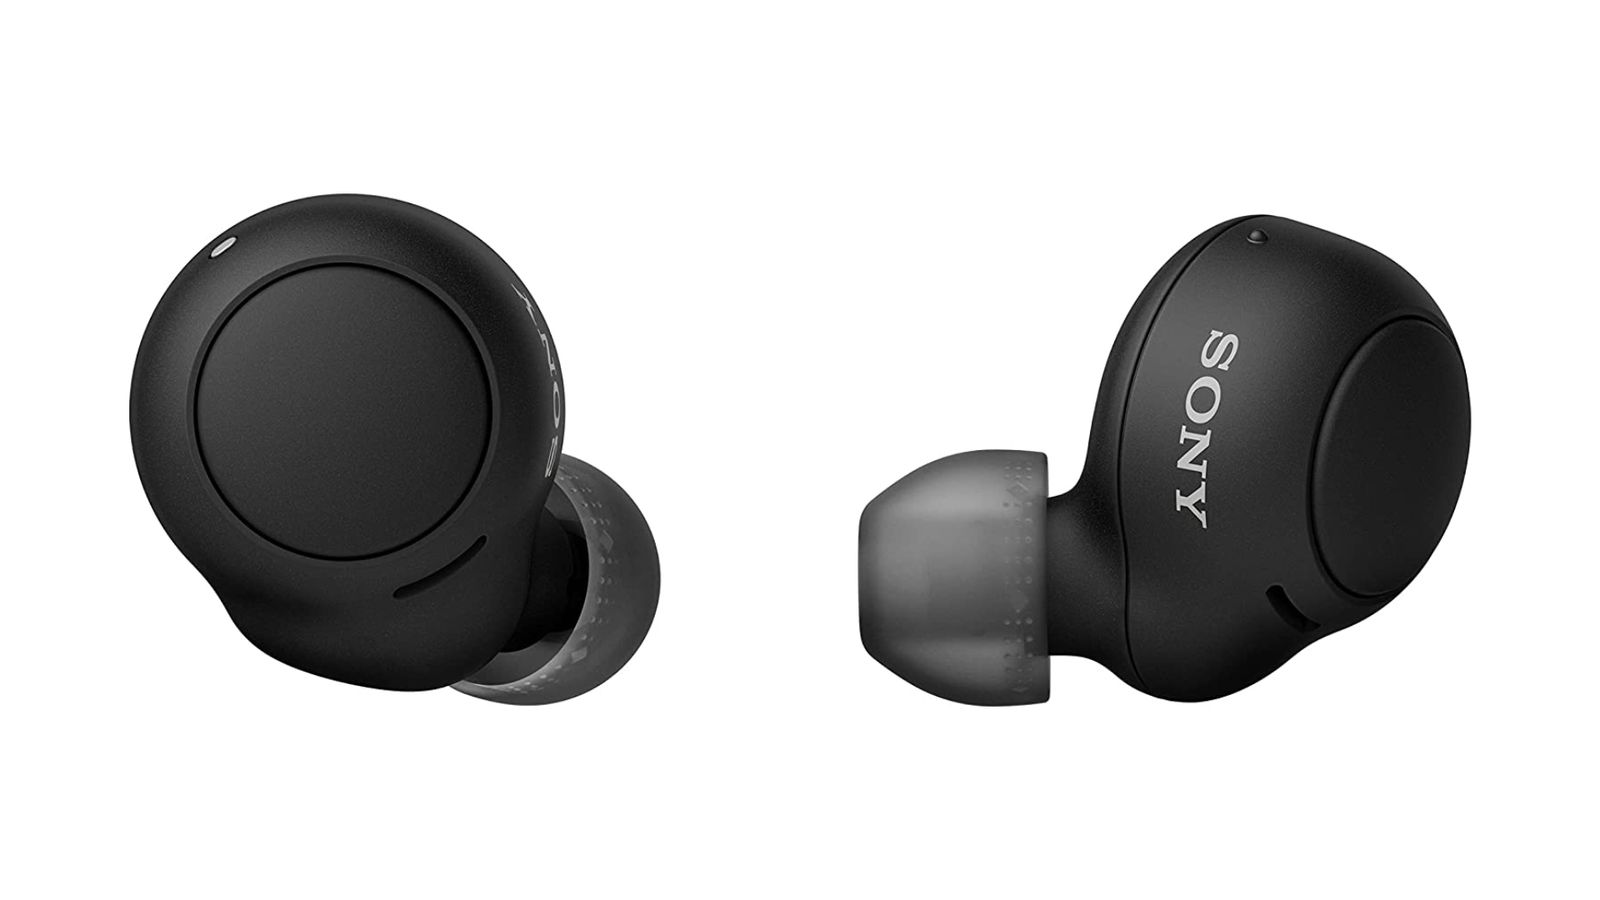 Best budget earbuds - Sony WF-C500 product image of two black wireless earbuds with translucent rubber earbud tips.